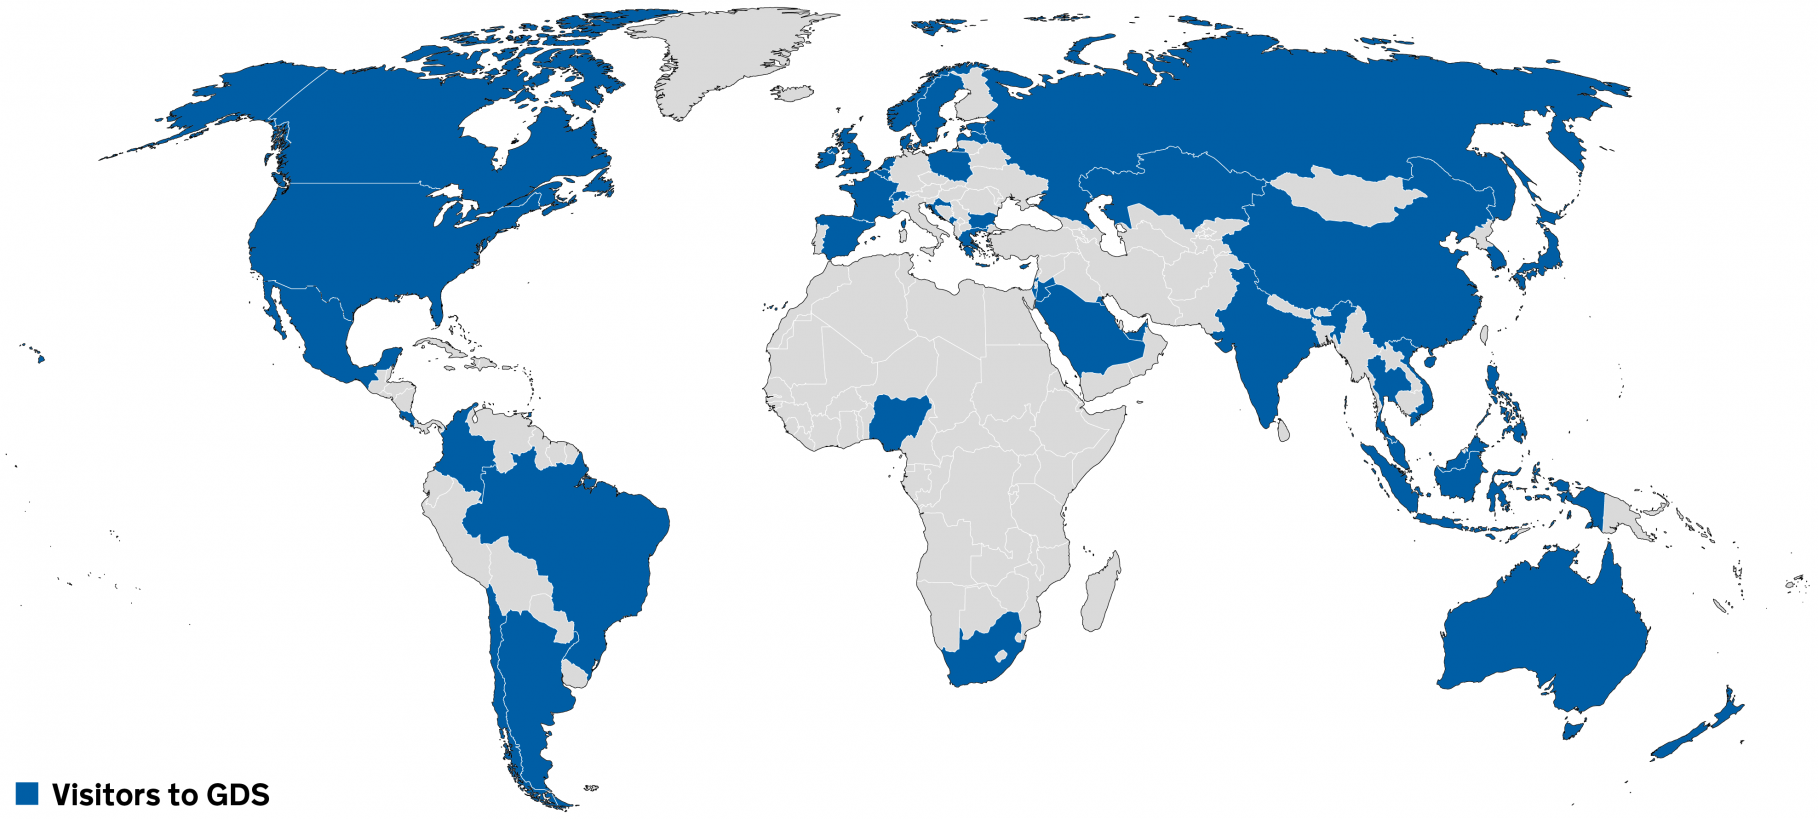 World map with countries highlighted that from which GDS has had visitors